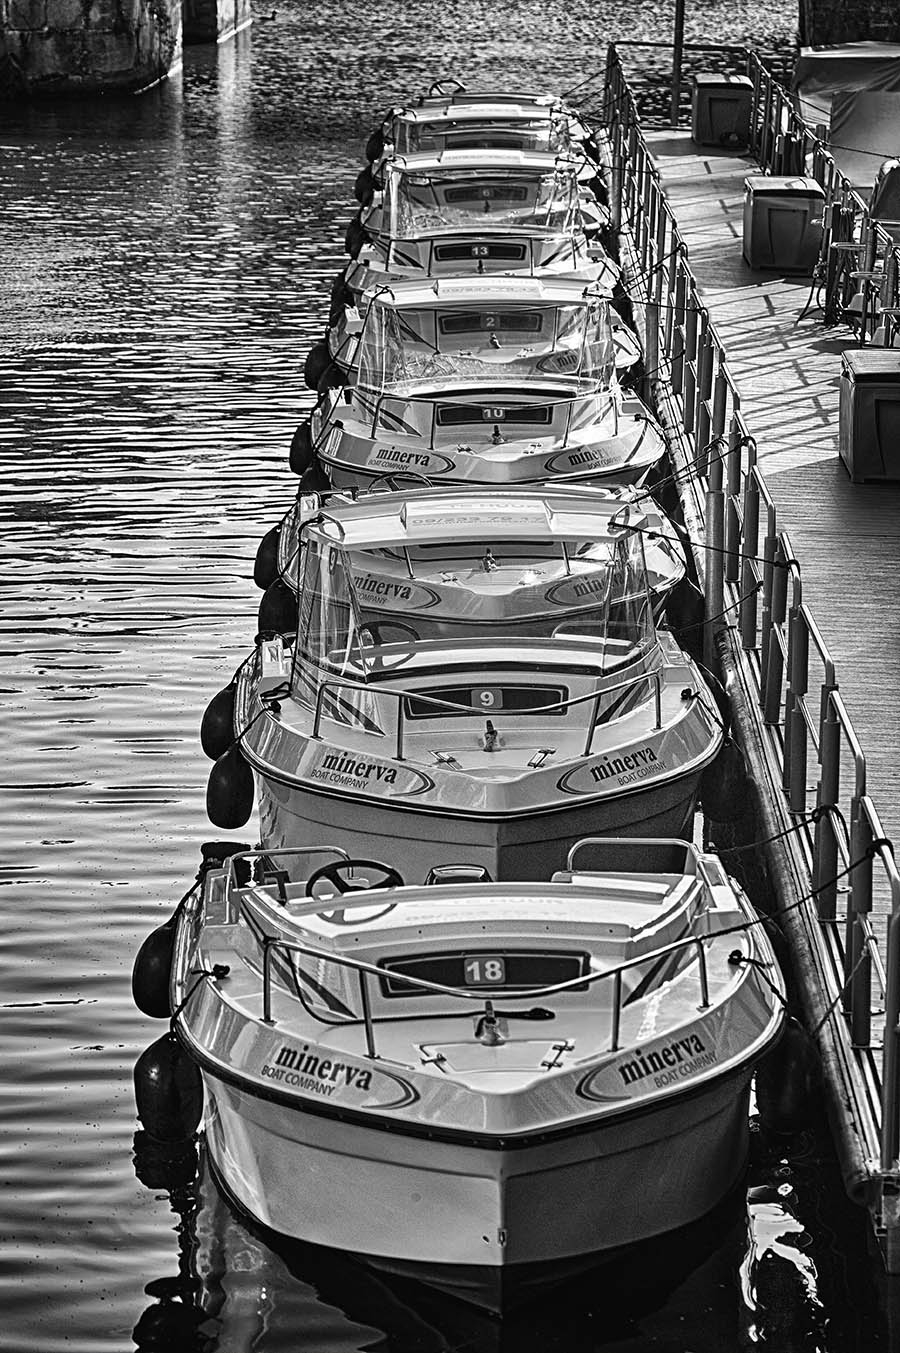 Another Mess of Boats